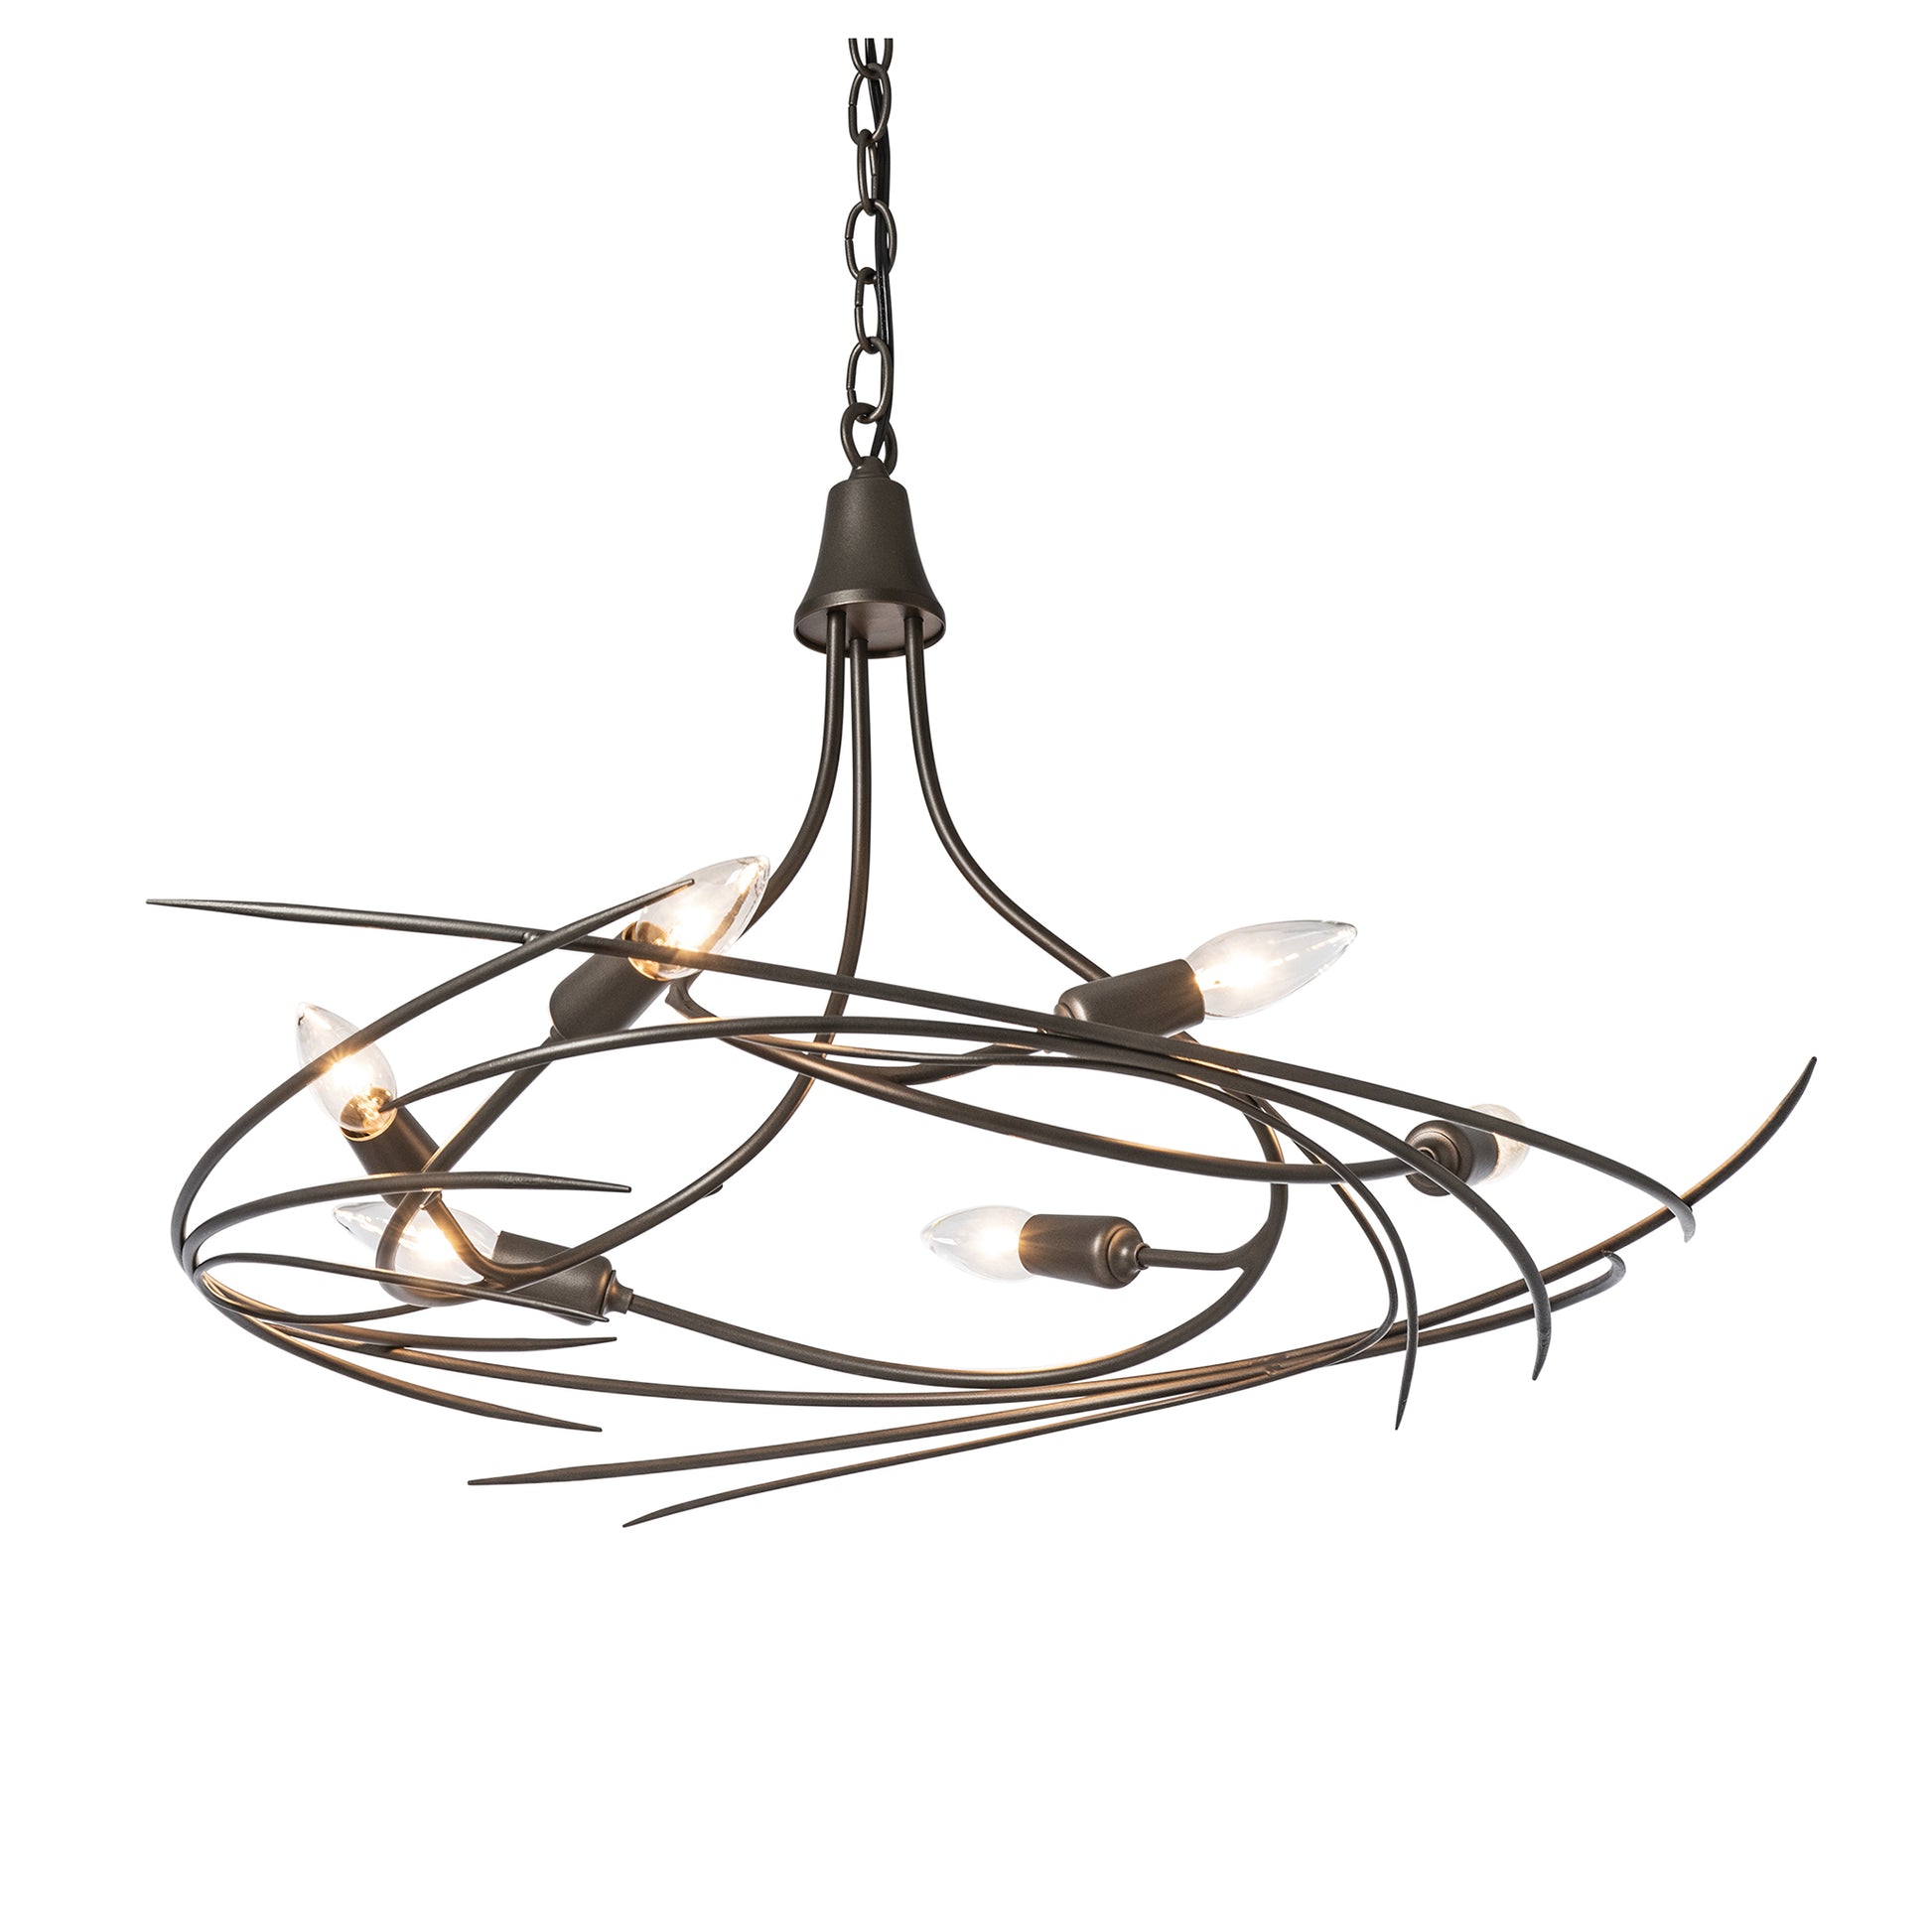 The Hubbardton Forge Wisp 6-Light Chandelier is a metal masterpiece with a swirl pattern, truly embodying elegant silhouette.